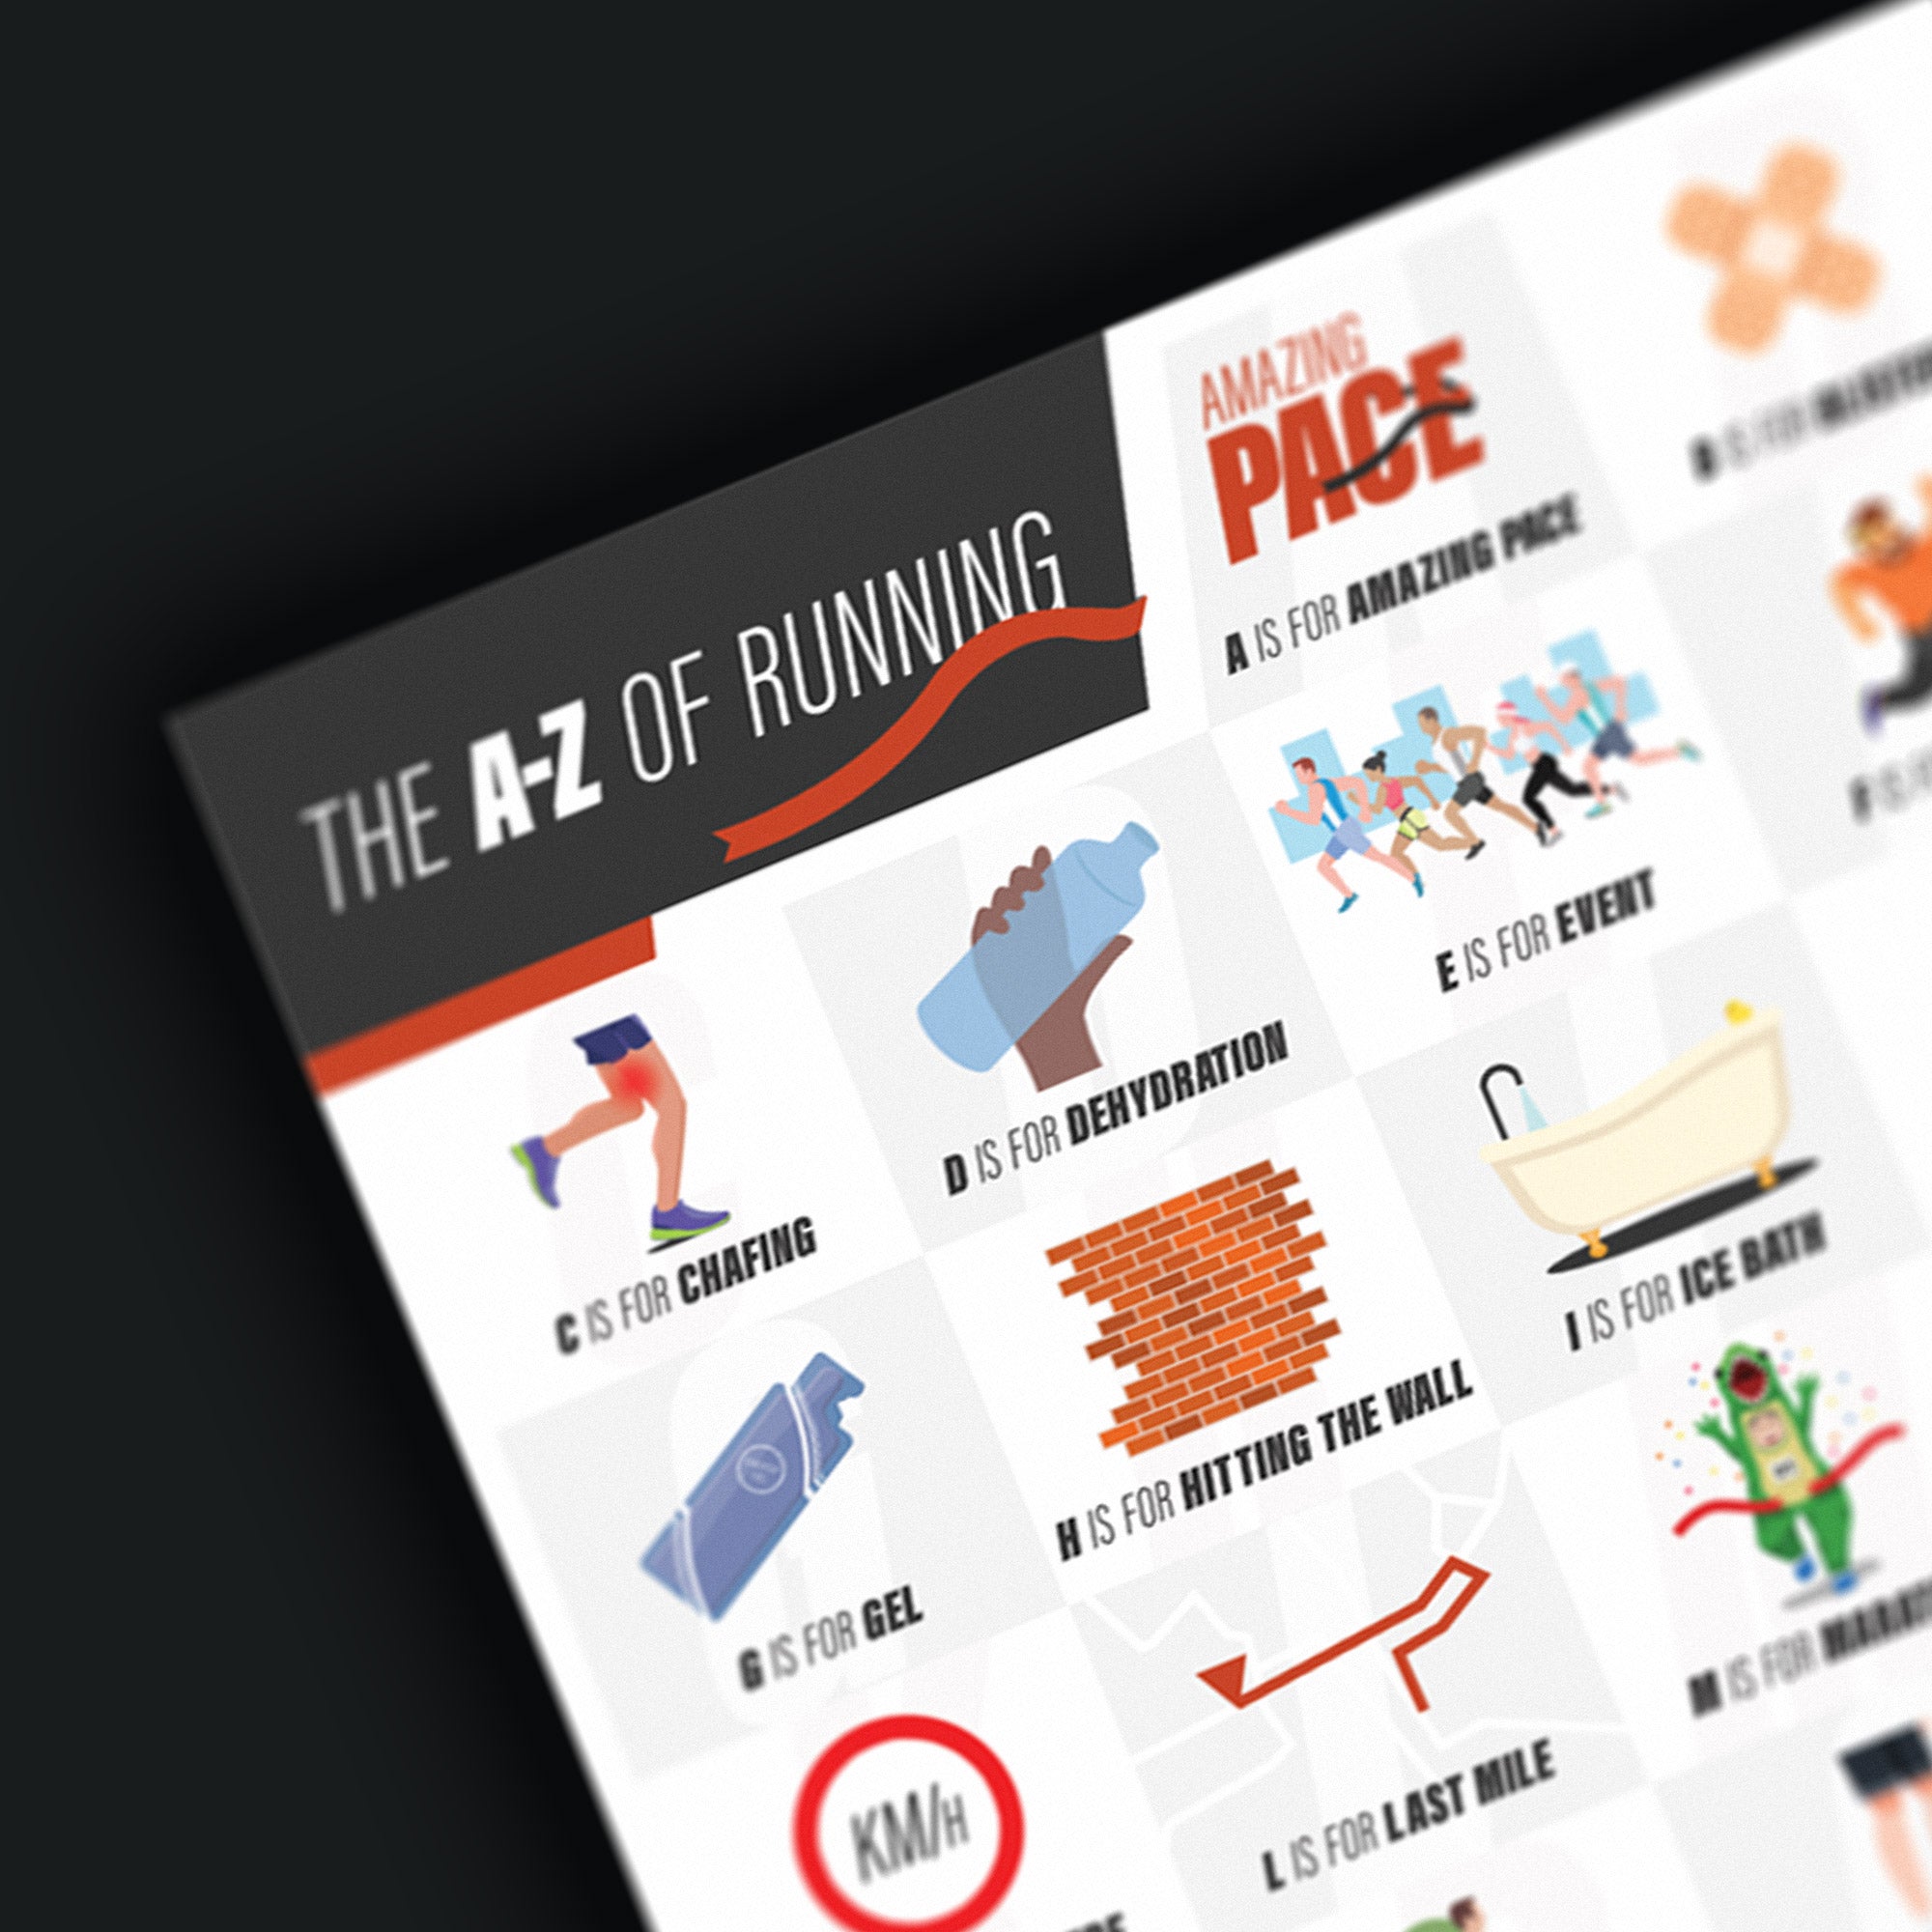 A-Z of Running 'Amazing Pace' Print